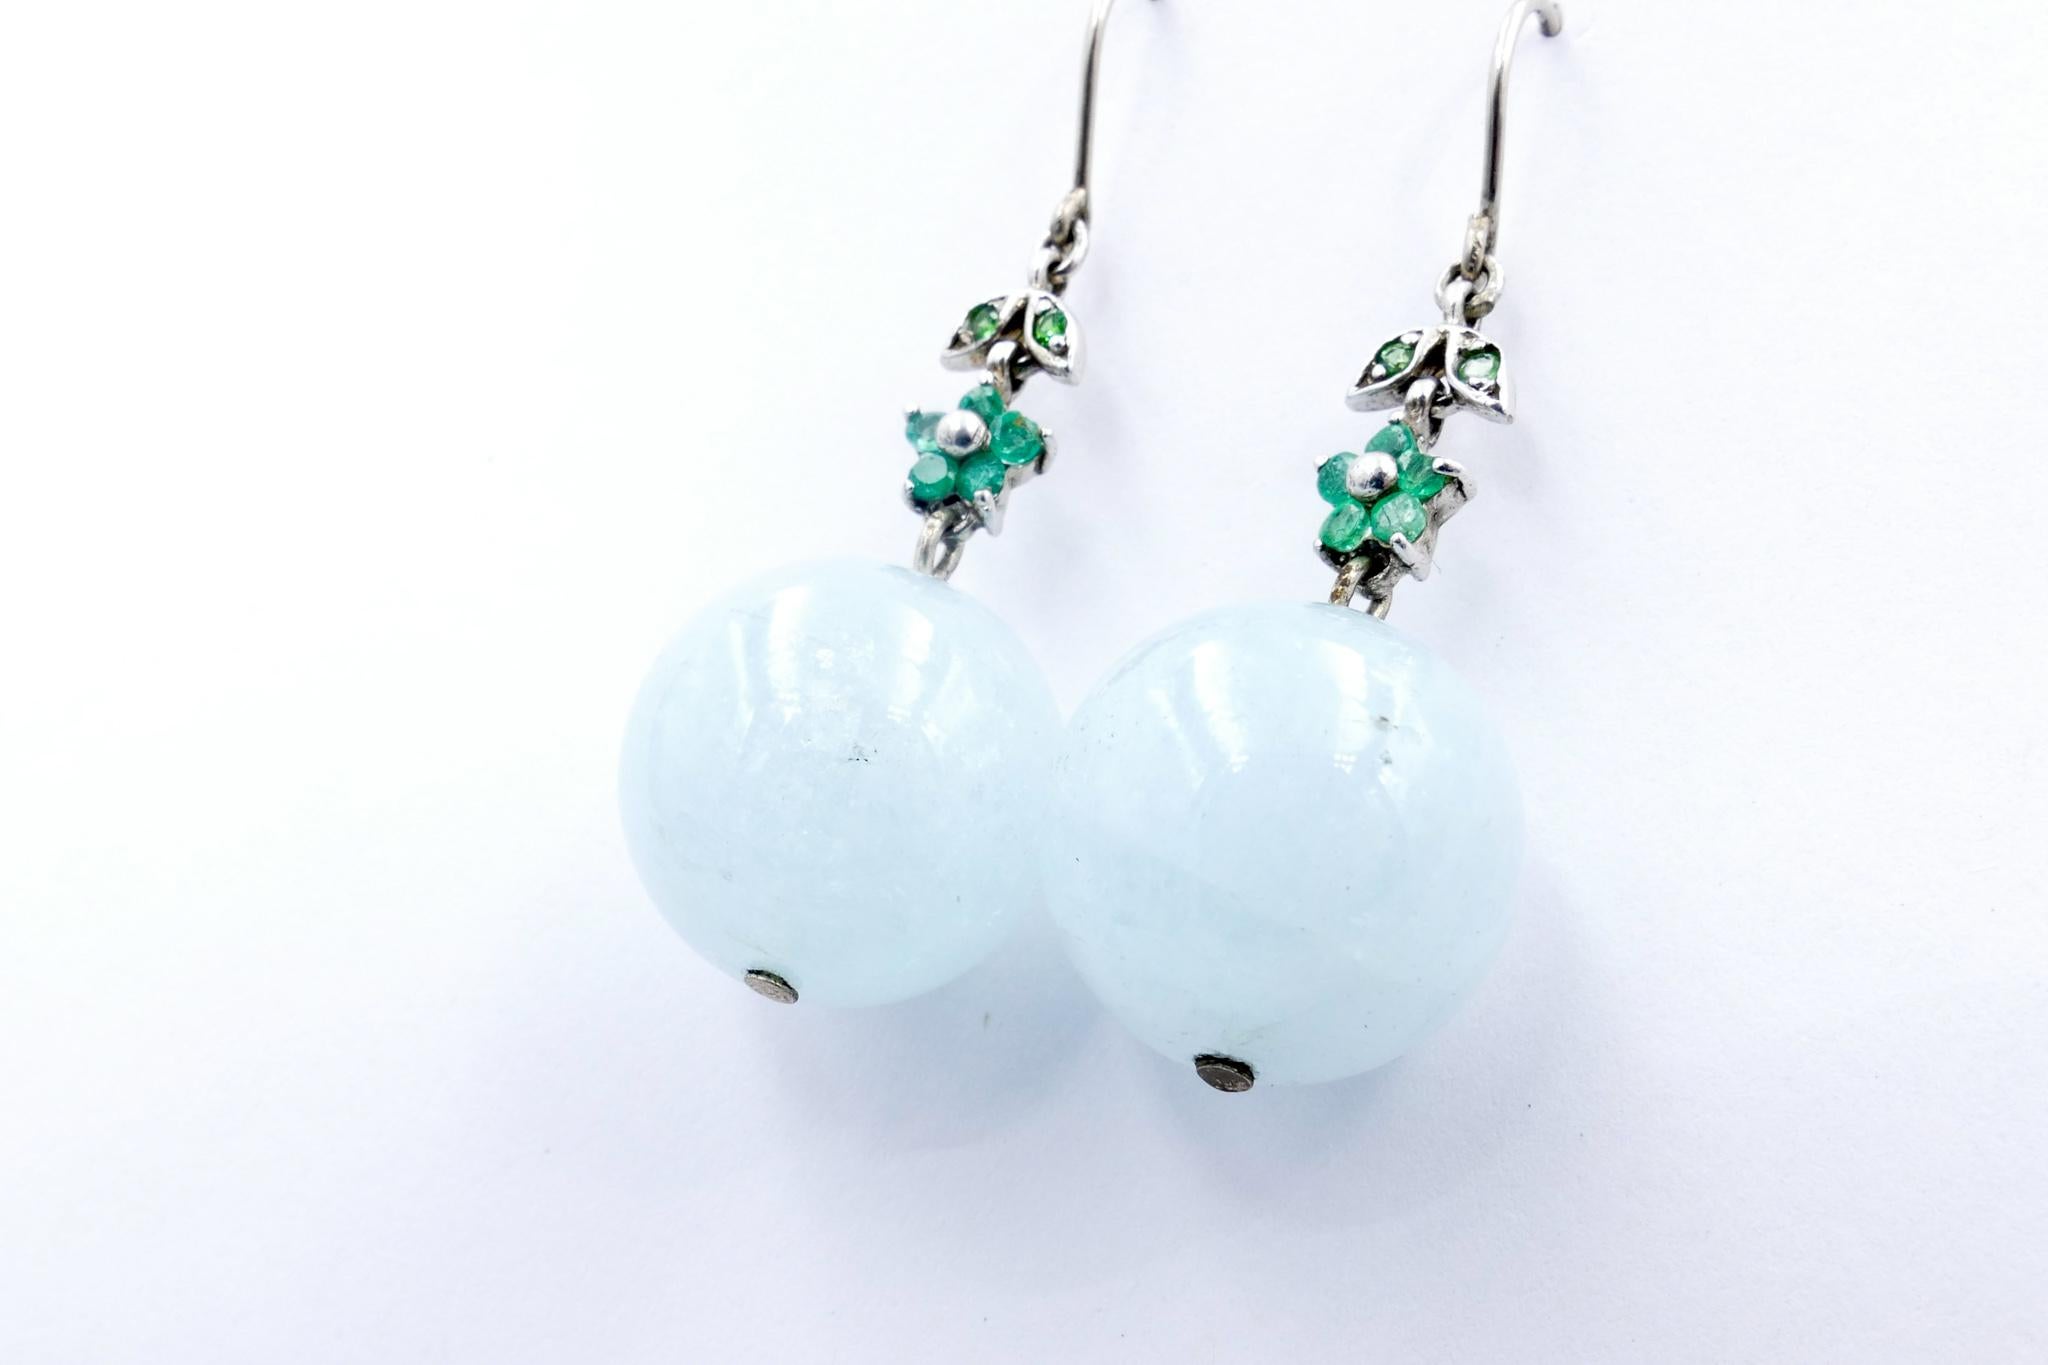 SUCH a pretty Pair of Earrings.
2 large Aquamarine balls sit below a flower pattern of vivid green Emeralds with a further 2 Tsavorite garnets set atop the Emeralds.
The Earrings measure 50mm X 17mm, are set in Silver and have shepherds hook